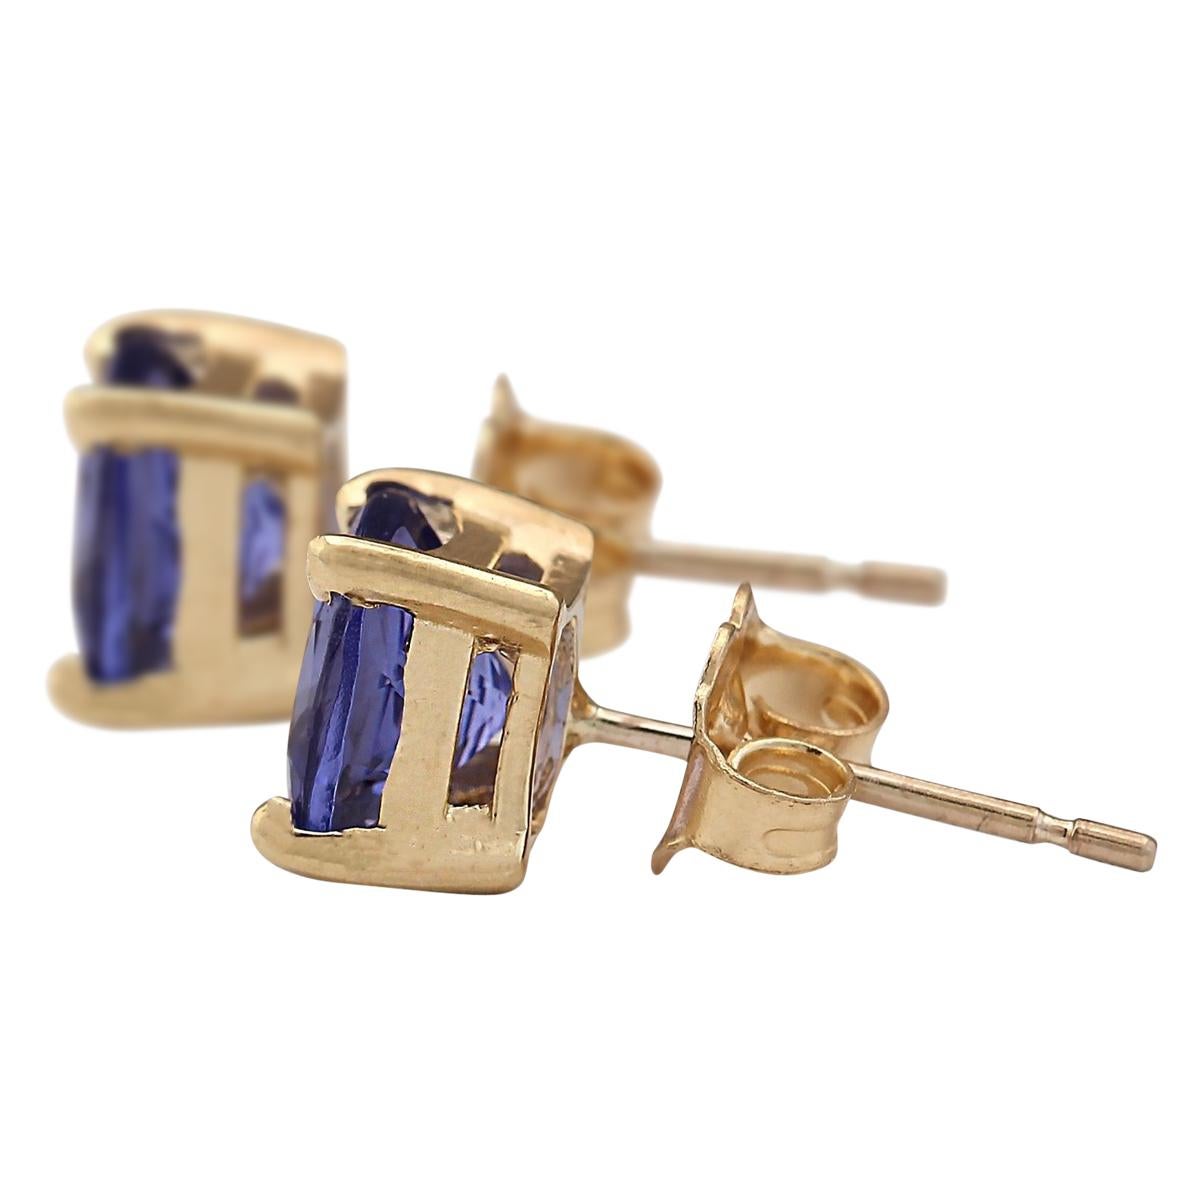 Stamped: 14K Yellow Gold
Total Earrings Weight: 1.4 Grams
Total Natural Tanzanite Weight is 2.90 Carat
Color: Blue
Face Measures: 6.50x6.50 mm
Sku: [703311W]